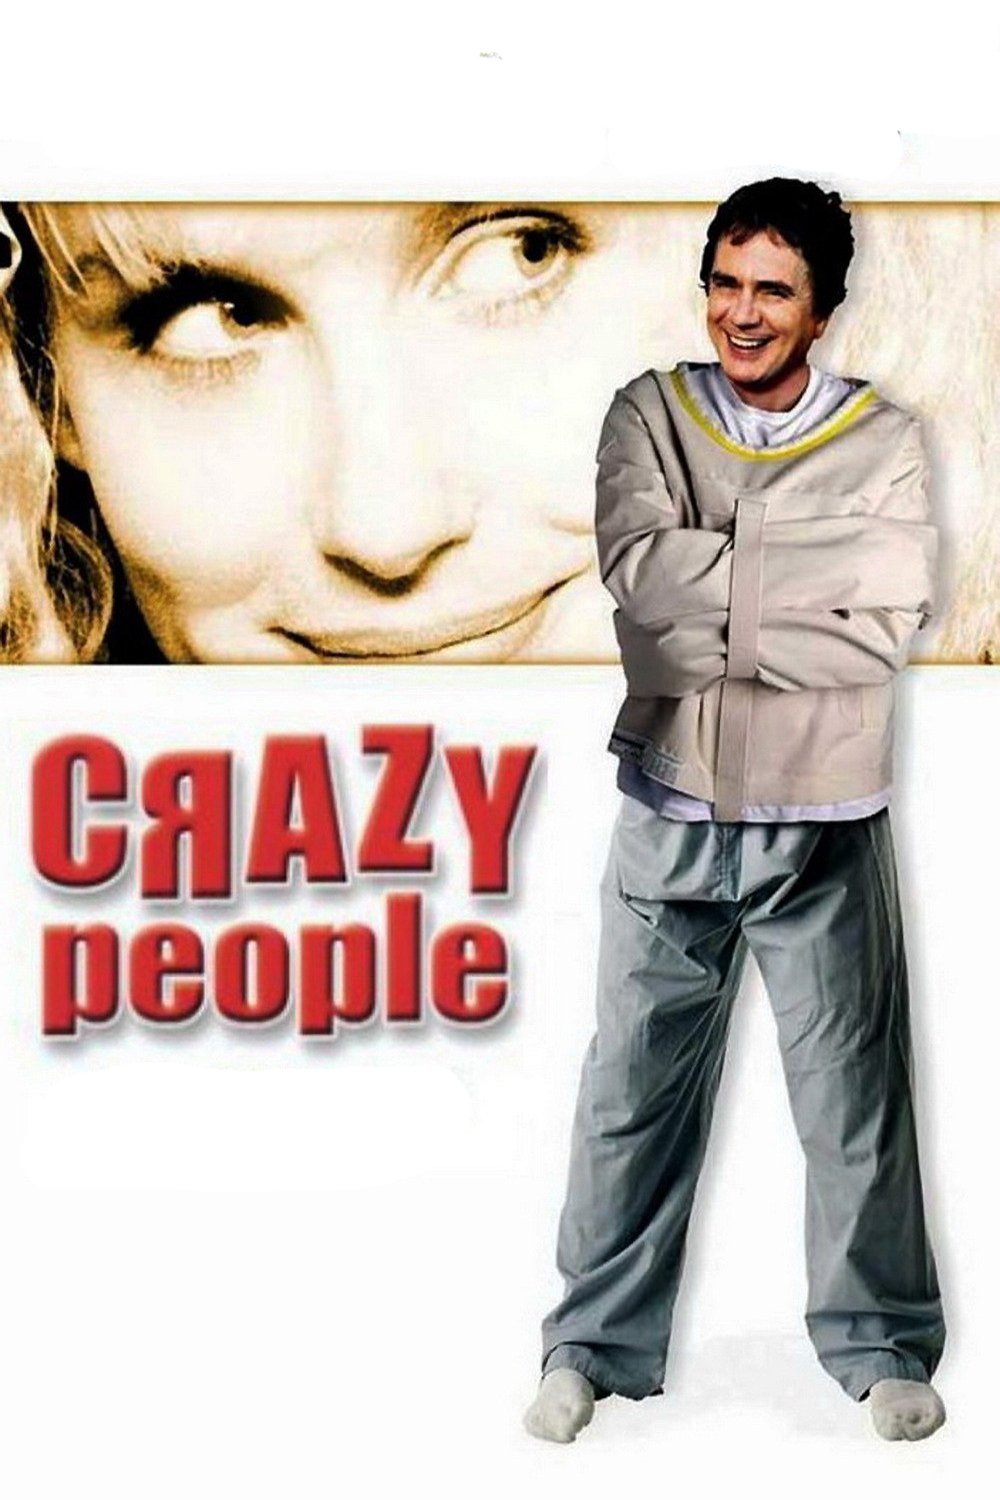 Poster for the movie "Crazy People"